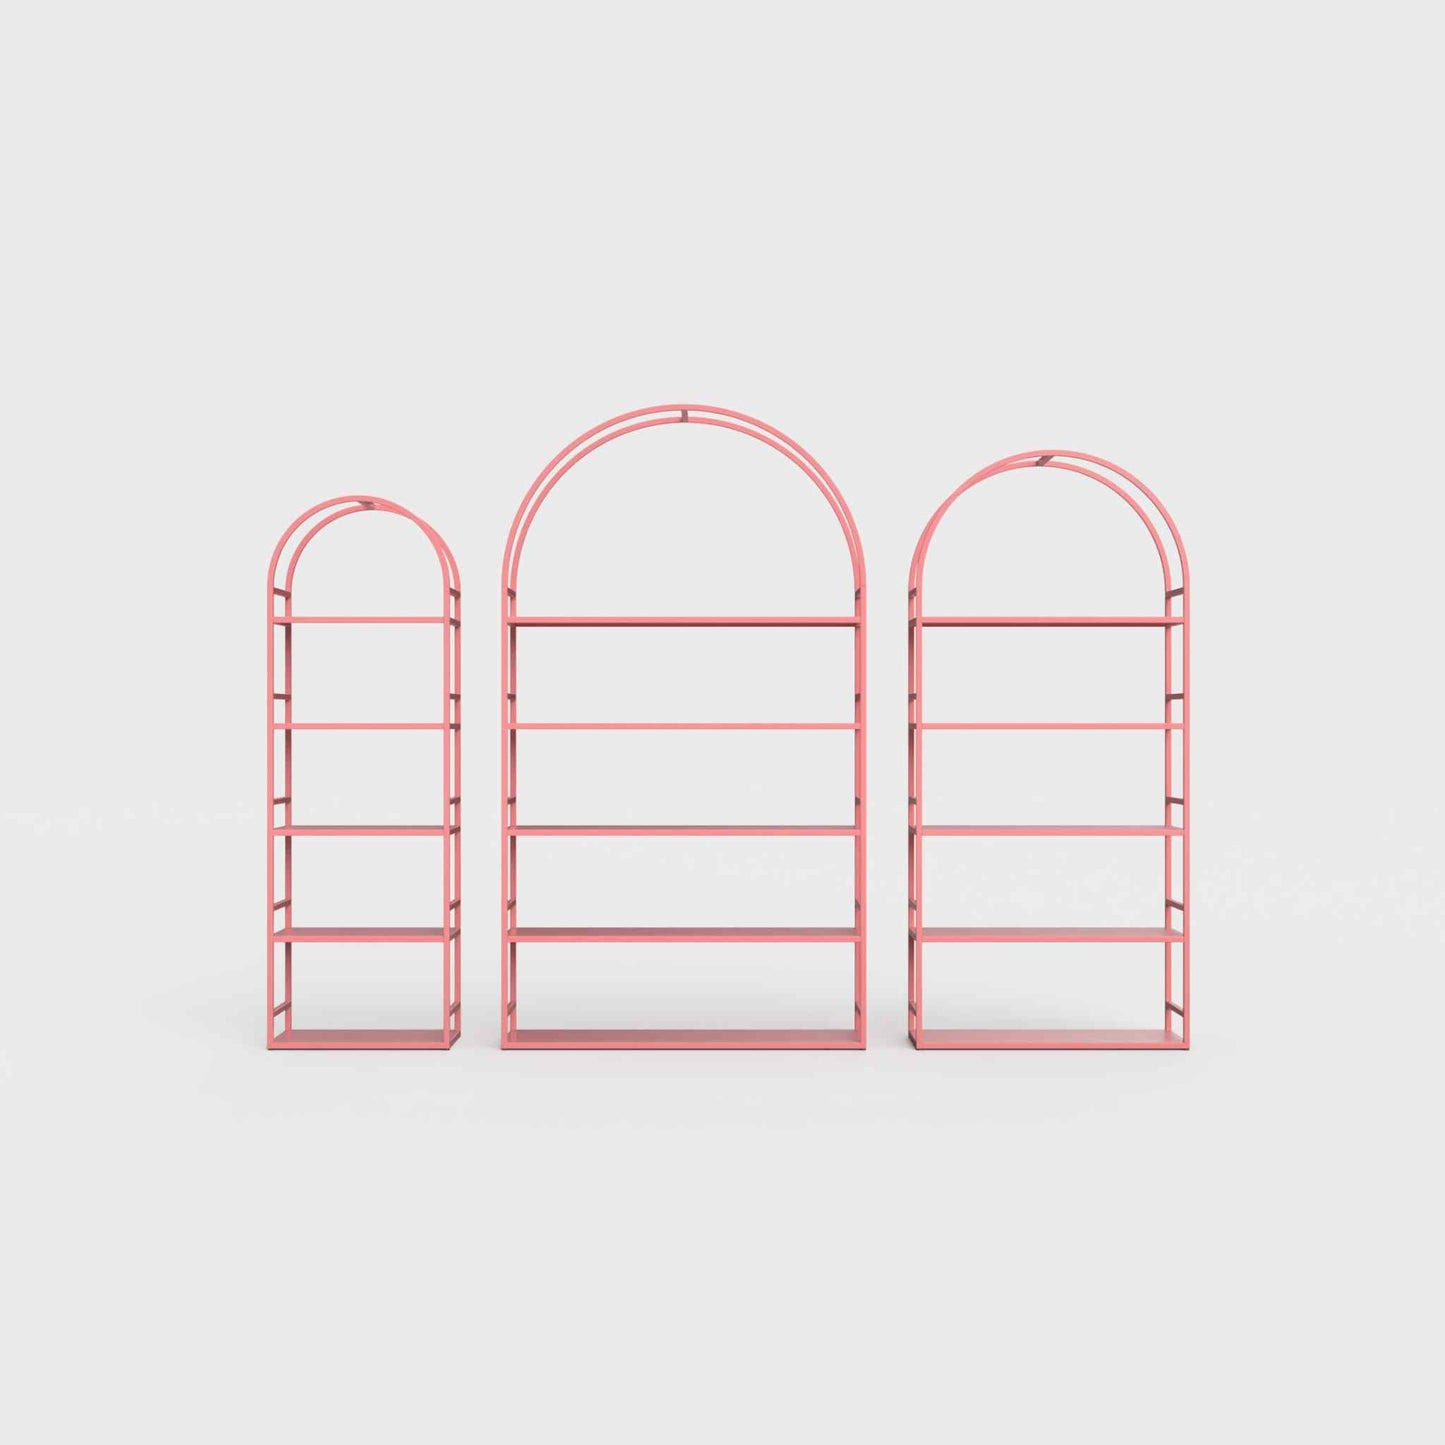 Arched bookcase Arkada, available in Switzerland through ÉTAUDORÉ, made from highest quality powdered coated steel in rose pink color